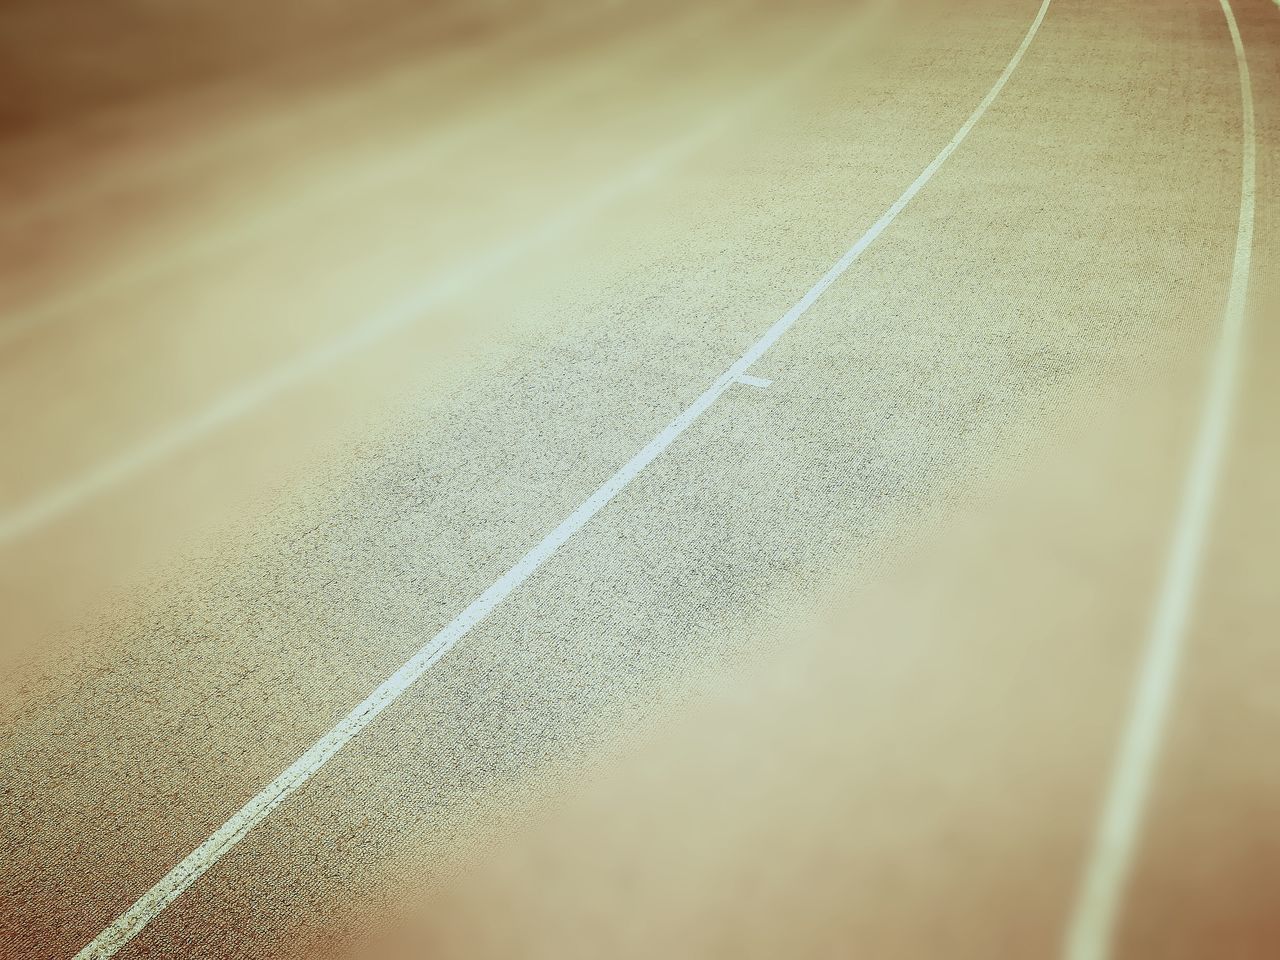 CLOSE-UP OF ROAD IN SUNLIGHT